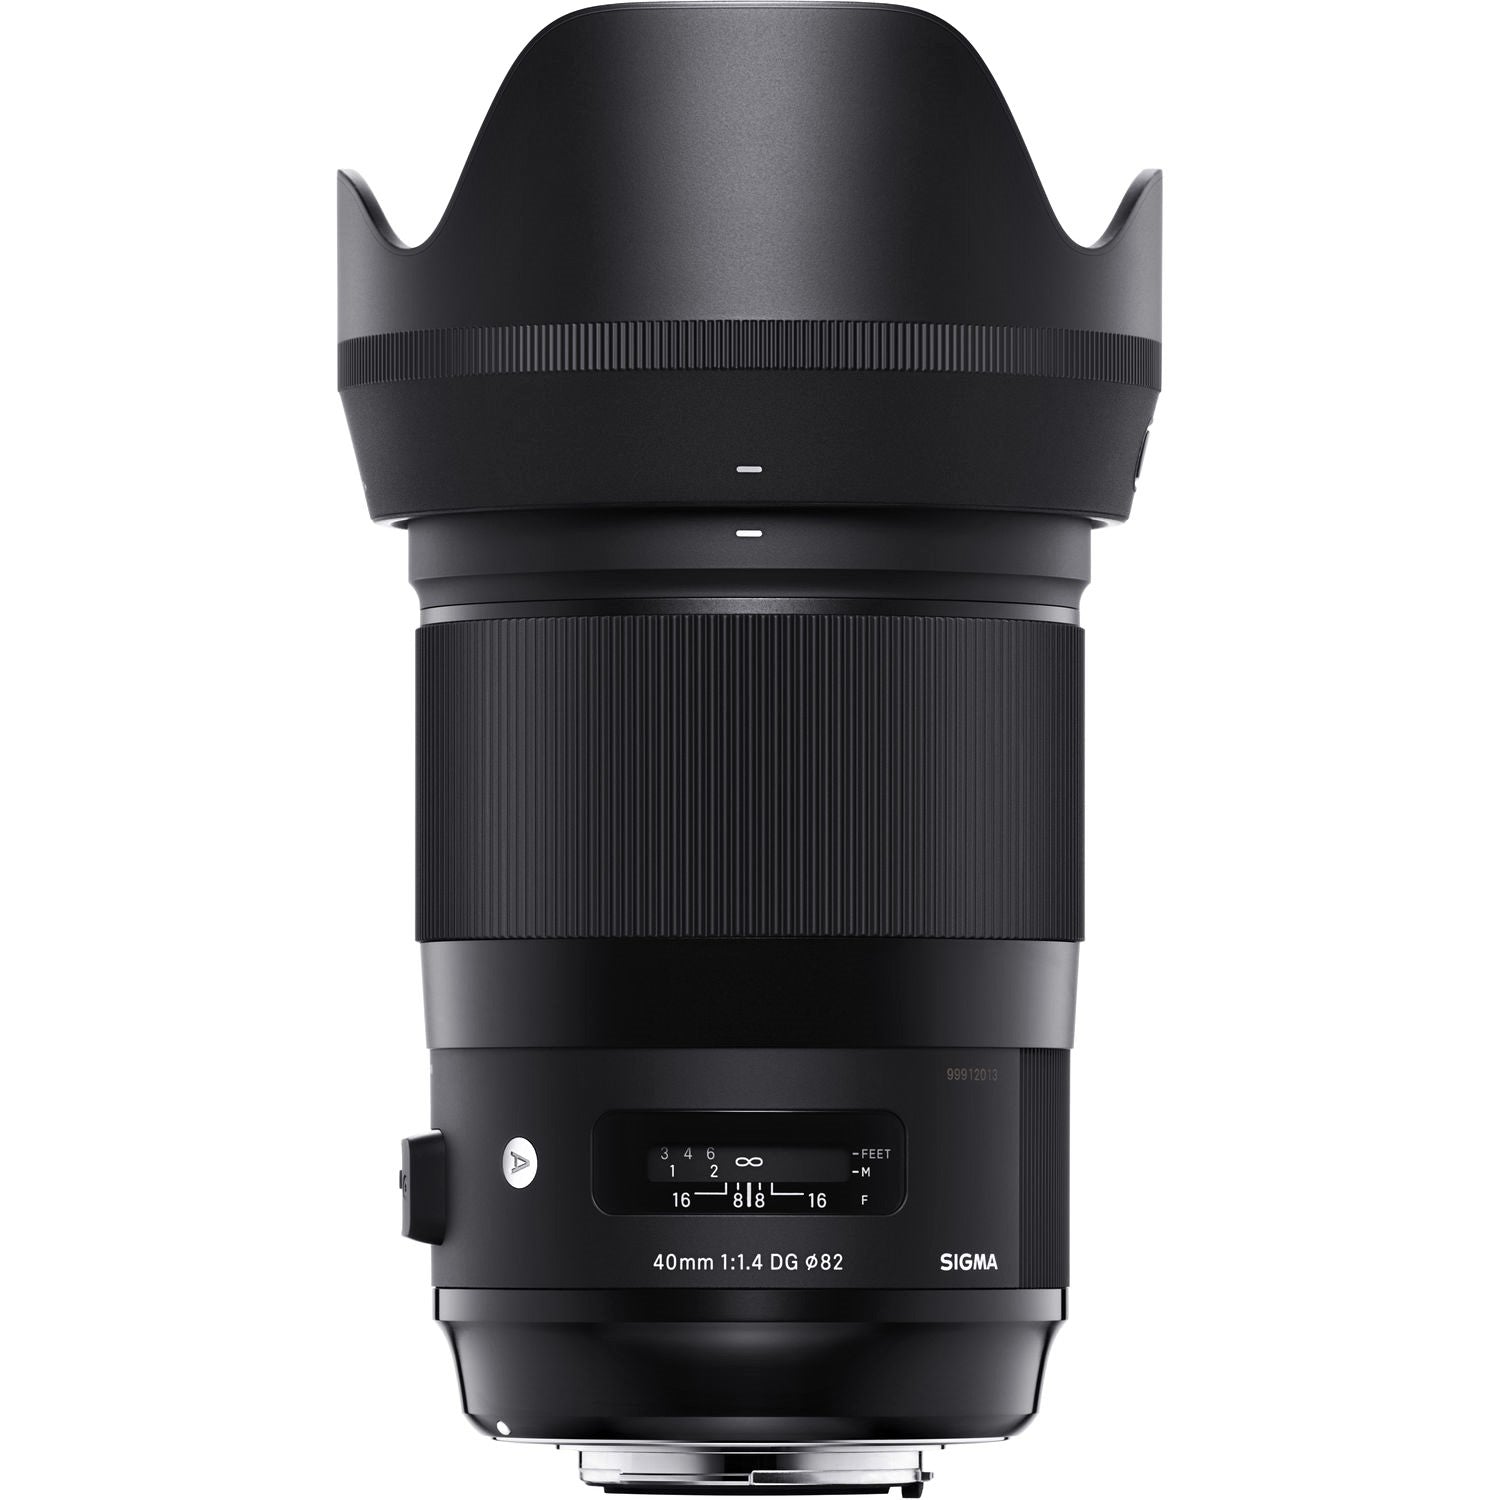 Sigma 40mm F1.4 DG HSM Art Lens for Canon EF with Attached Lens Hood on the Top